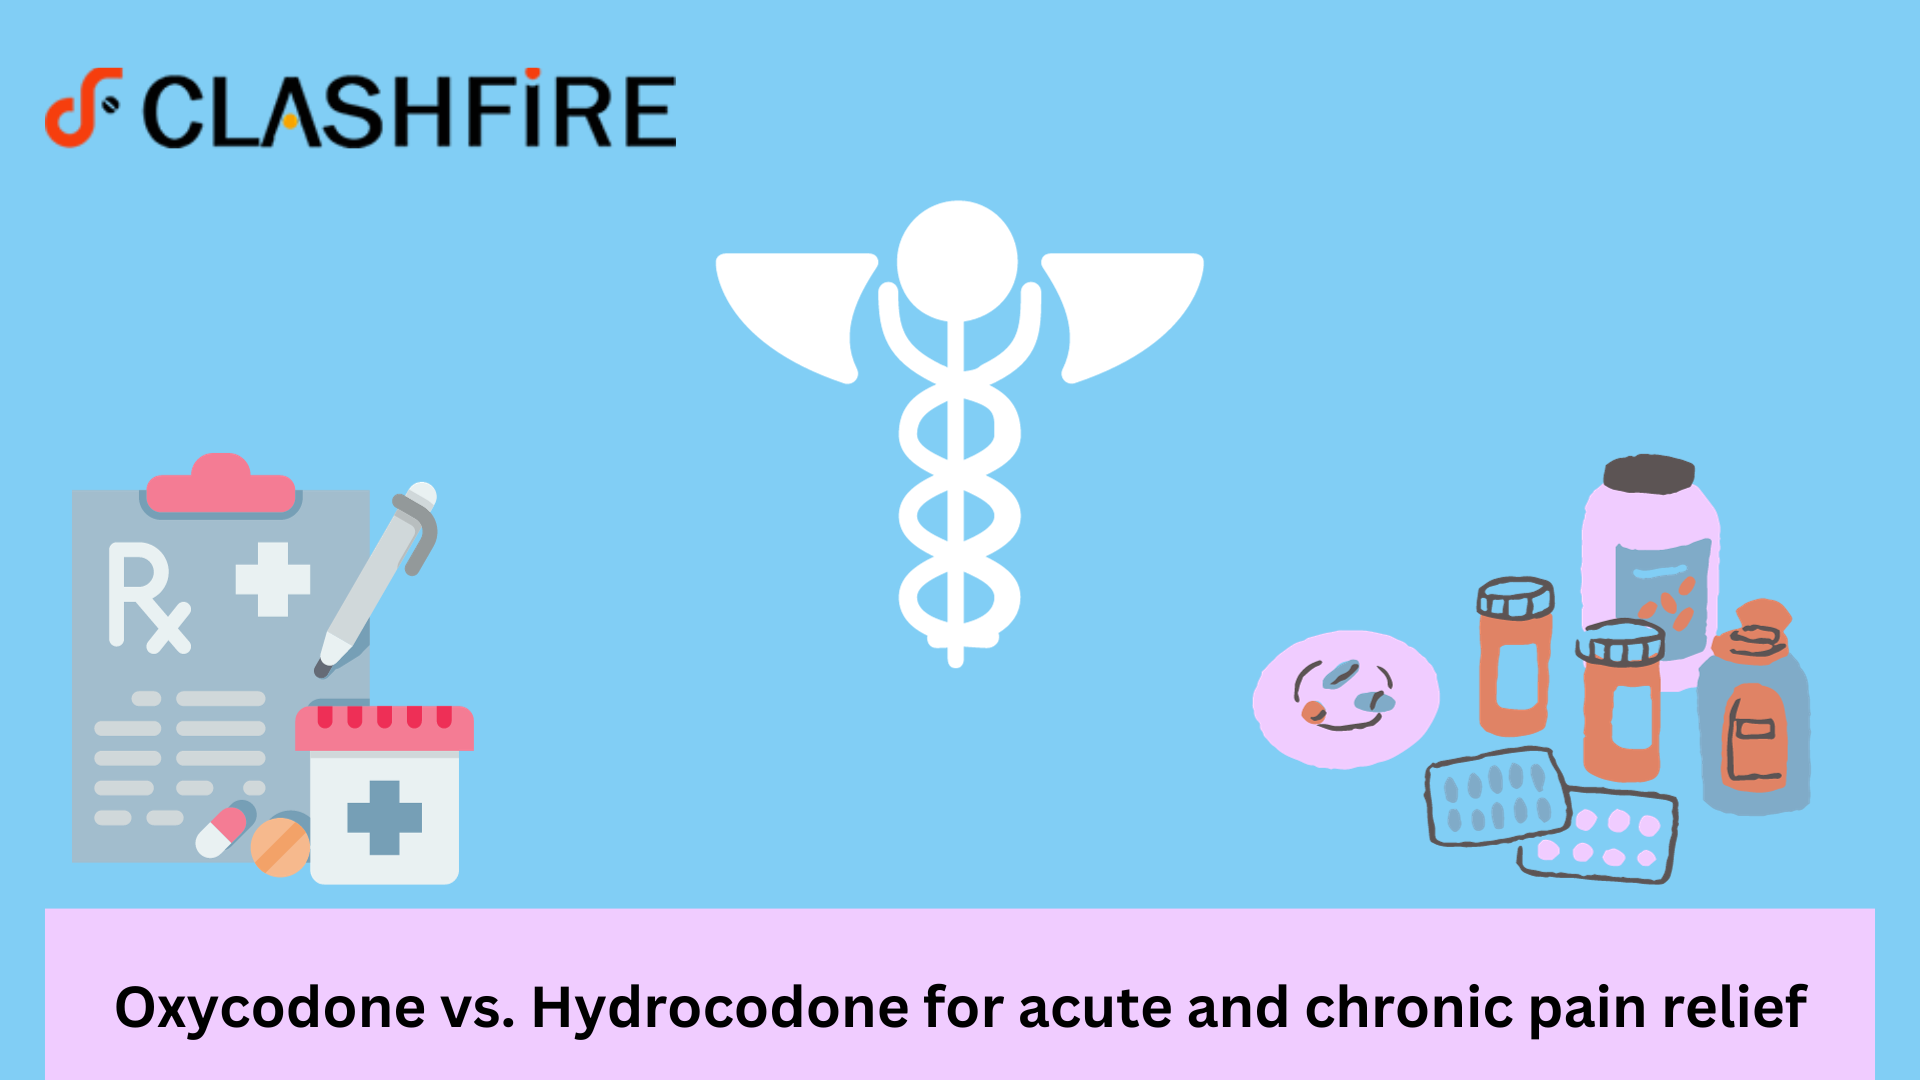 Oxycodone vs. Hydrocodone for acute and chronic pain relief